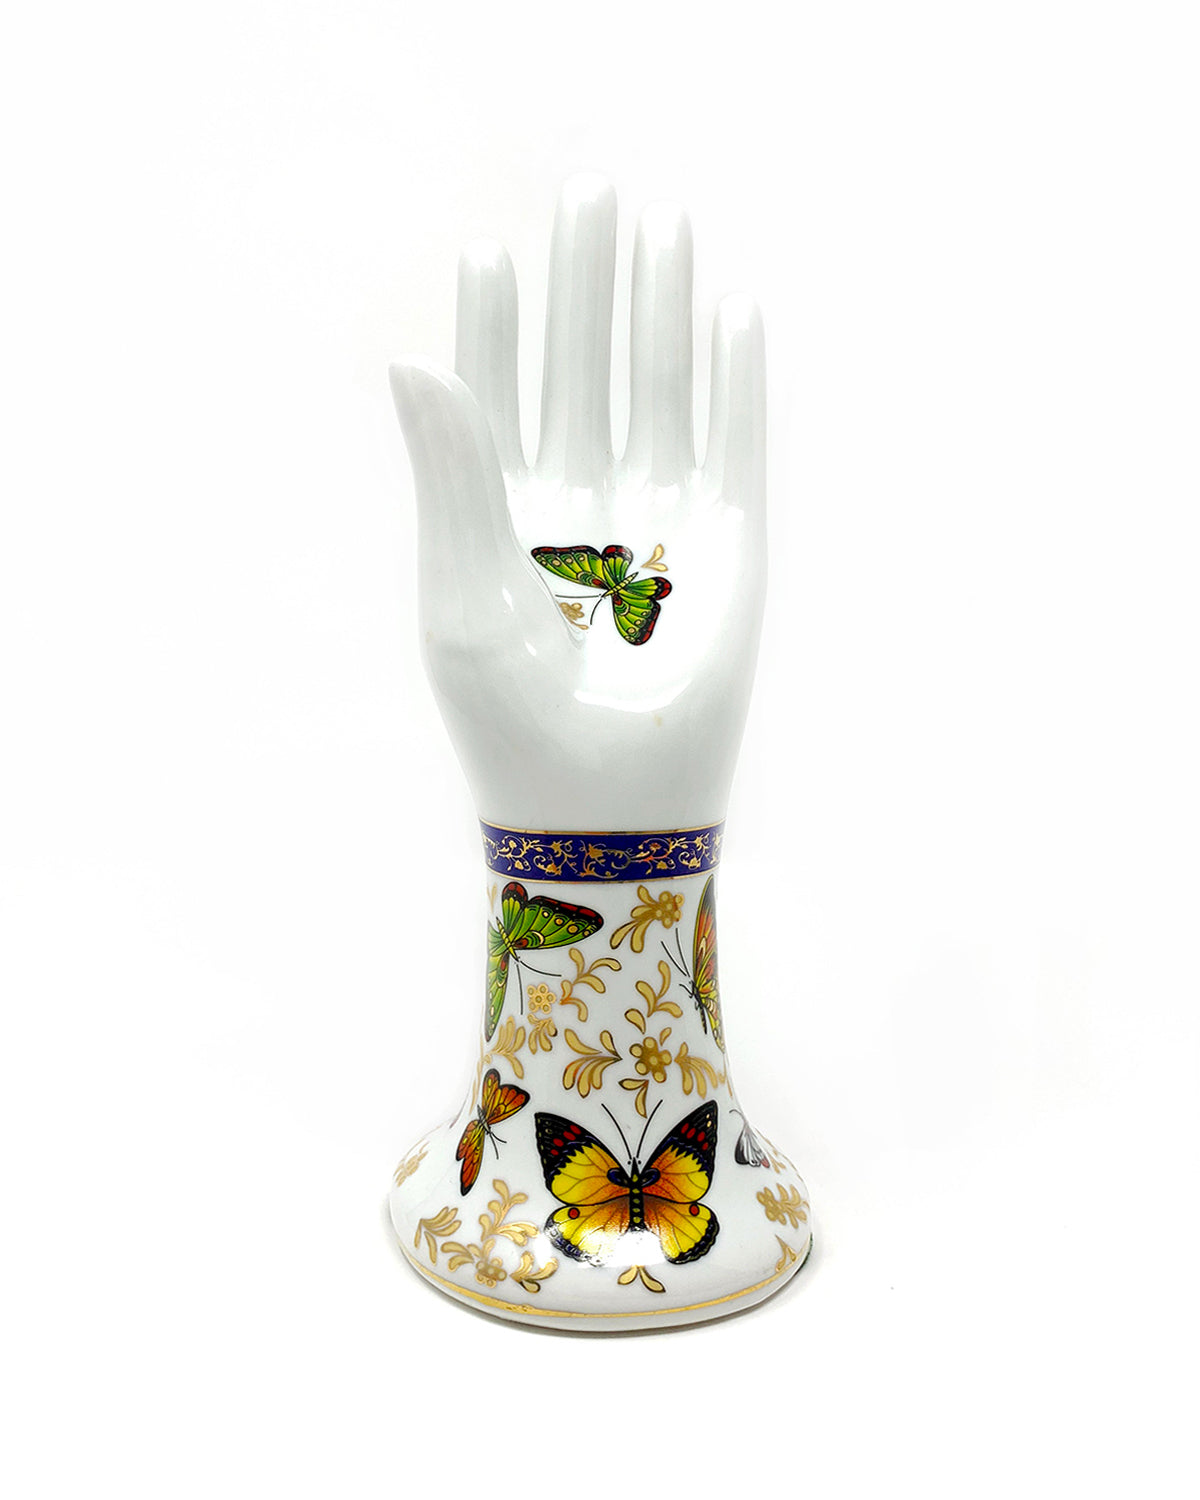 Vintage Porcelain Hand with Butterflies